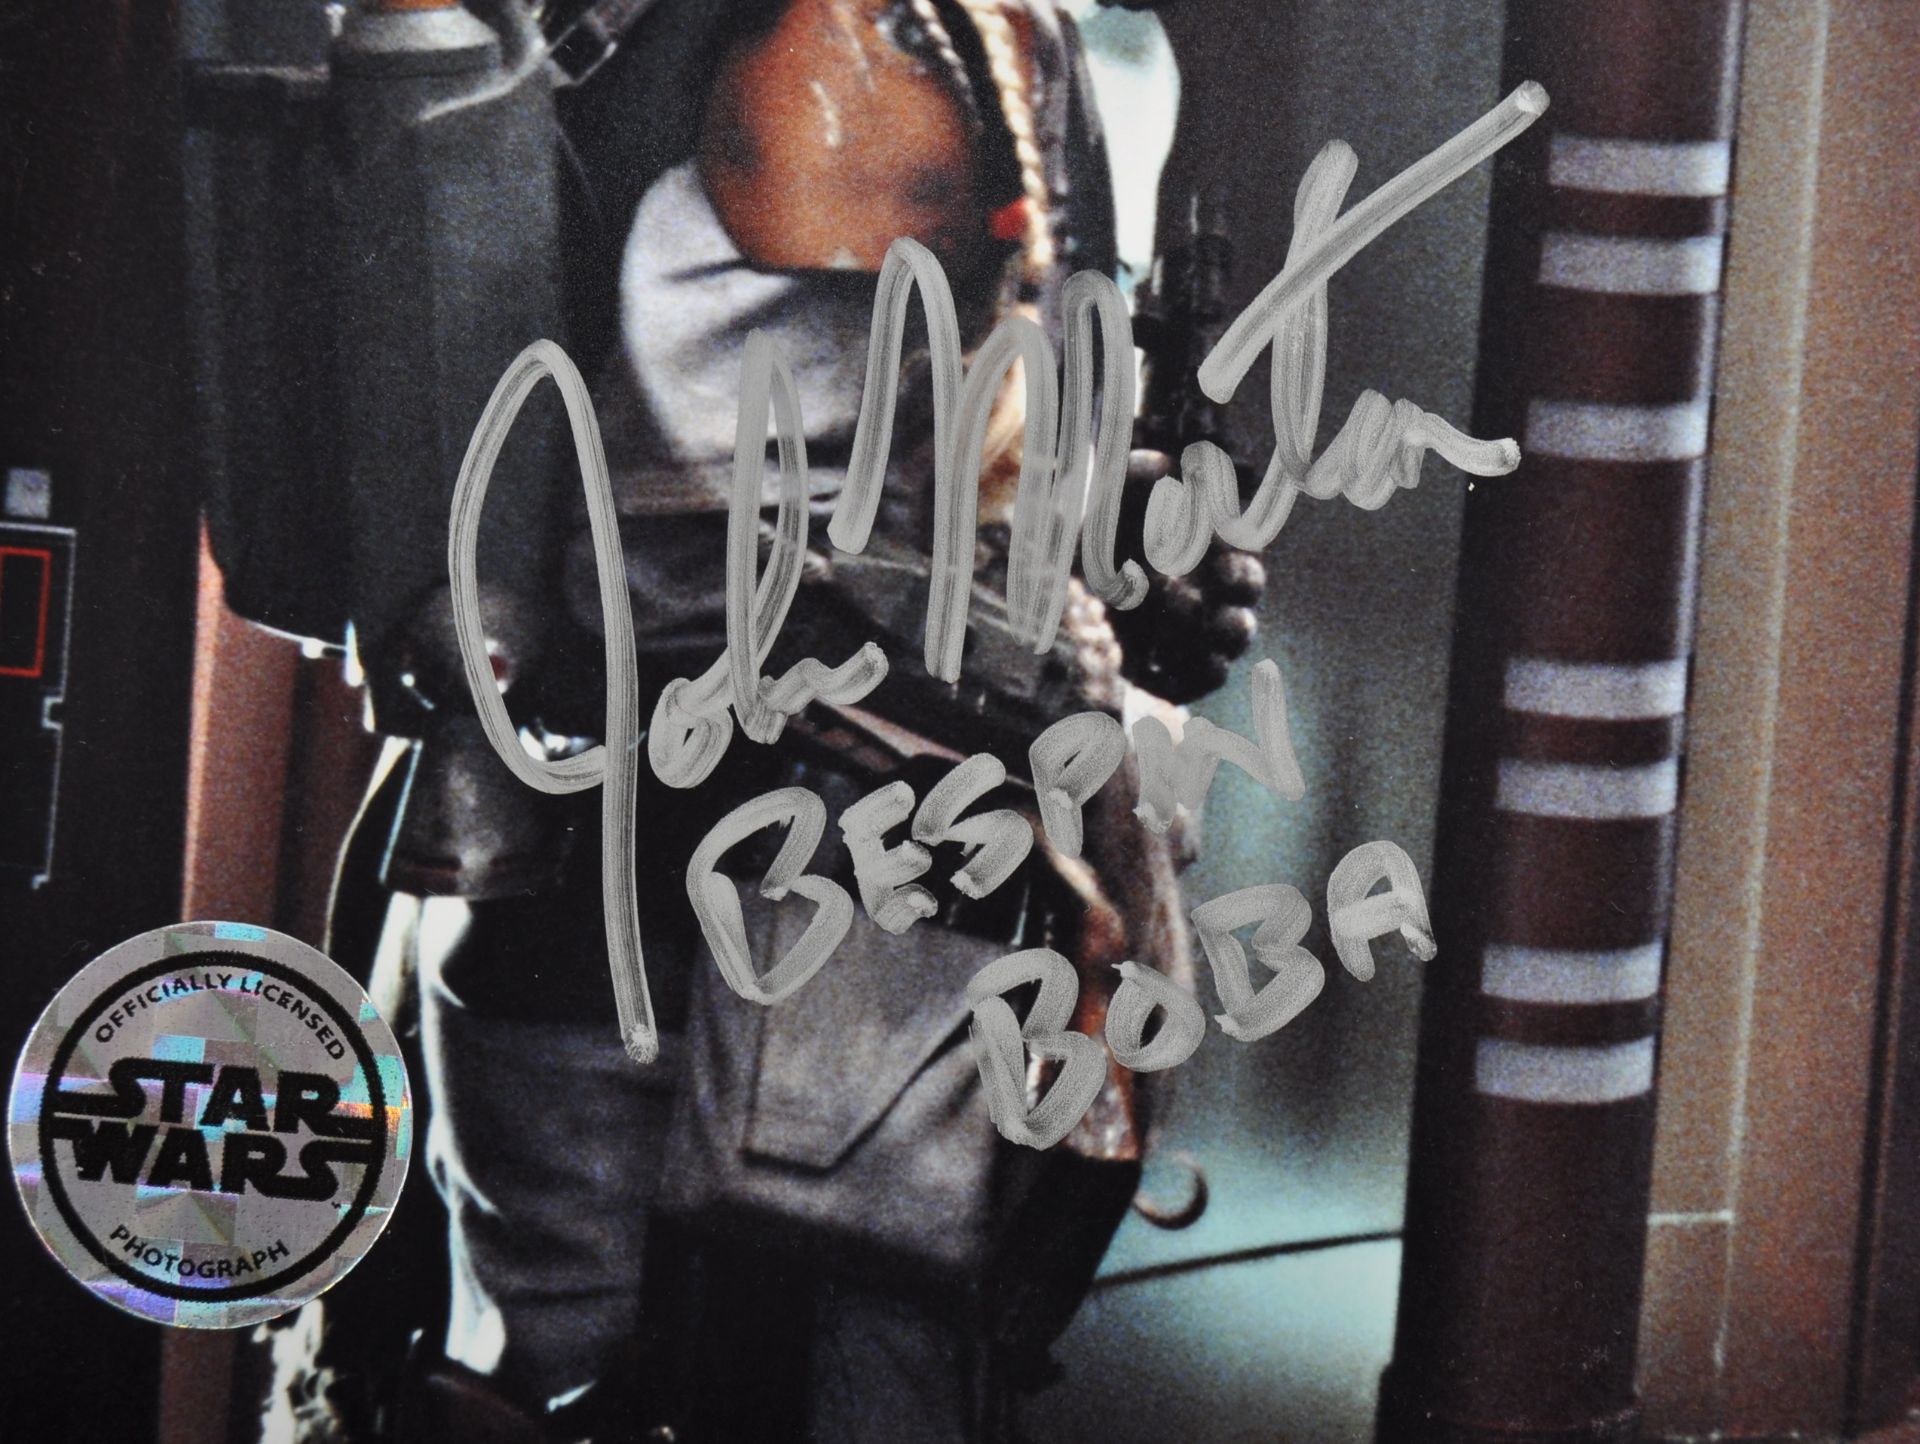 FROM THE COLLECTION OF DAVE PROWSE - DUAL STAR WARS SIGNED PHOTO - Image 3 of 3